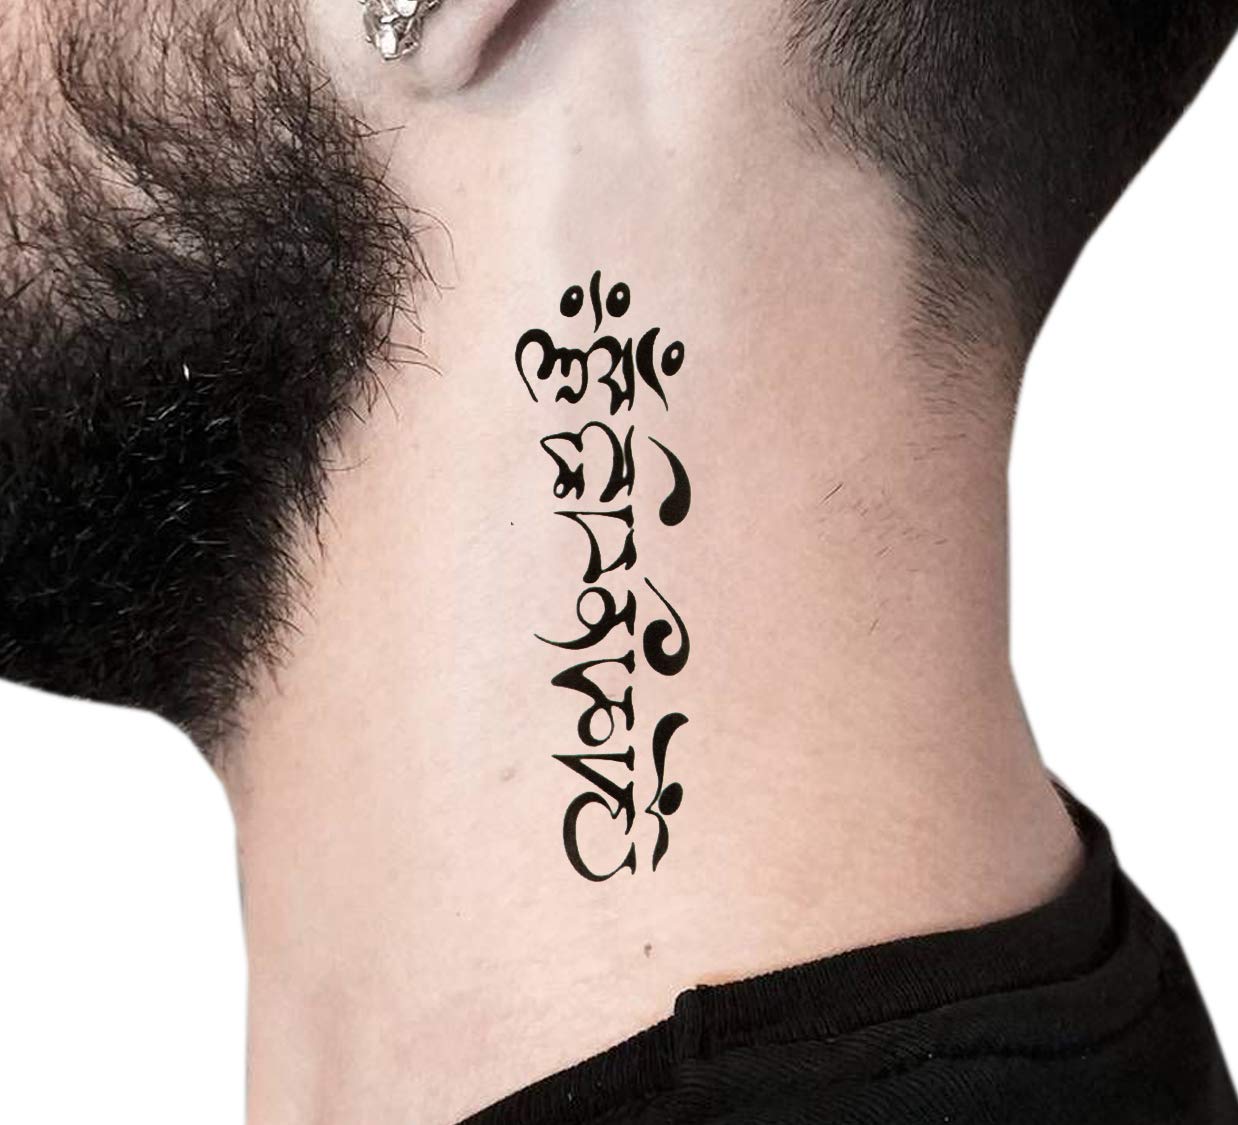 An example of a neck tattoo